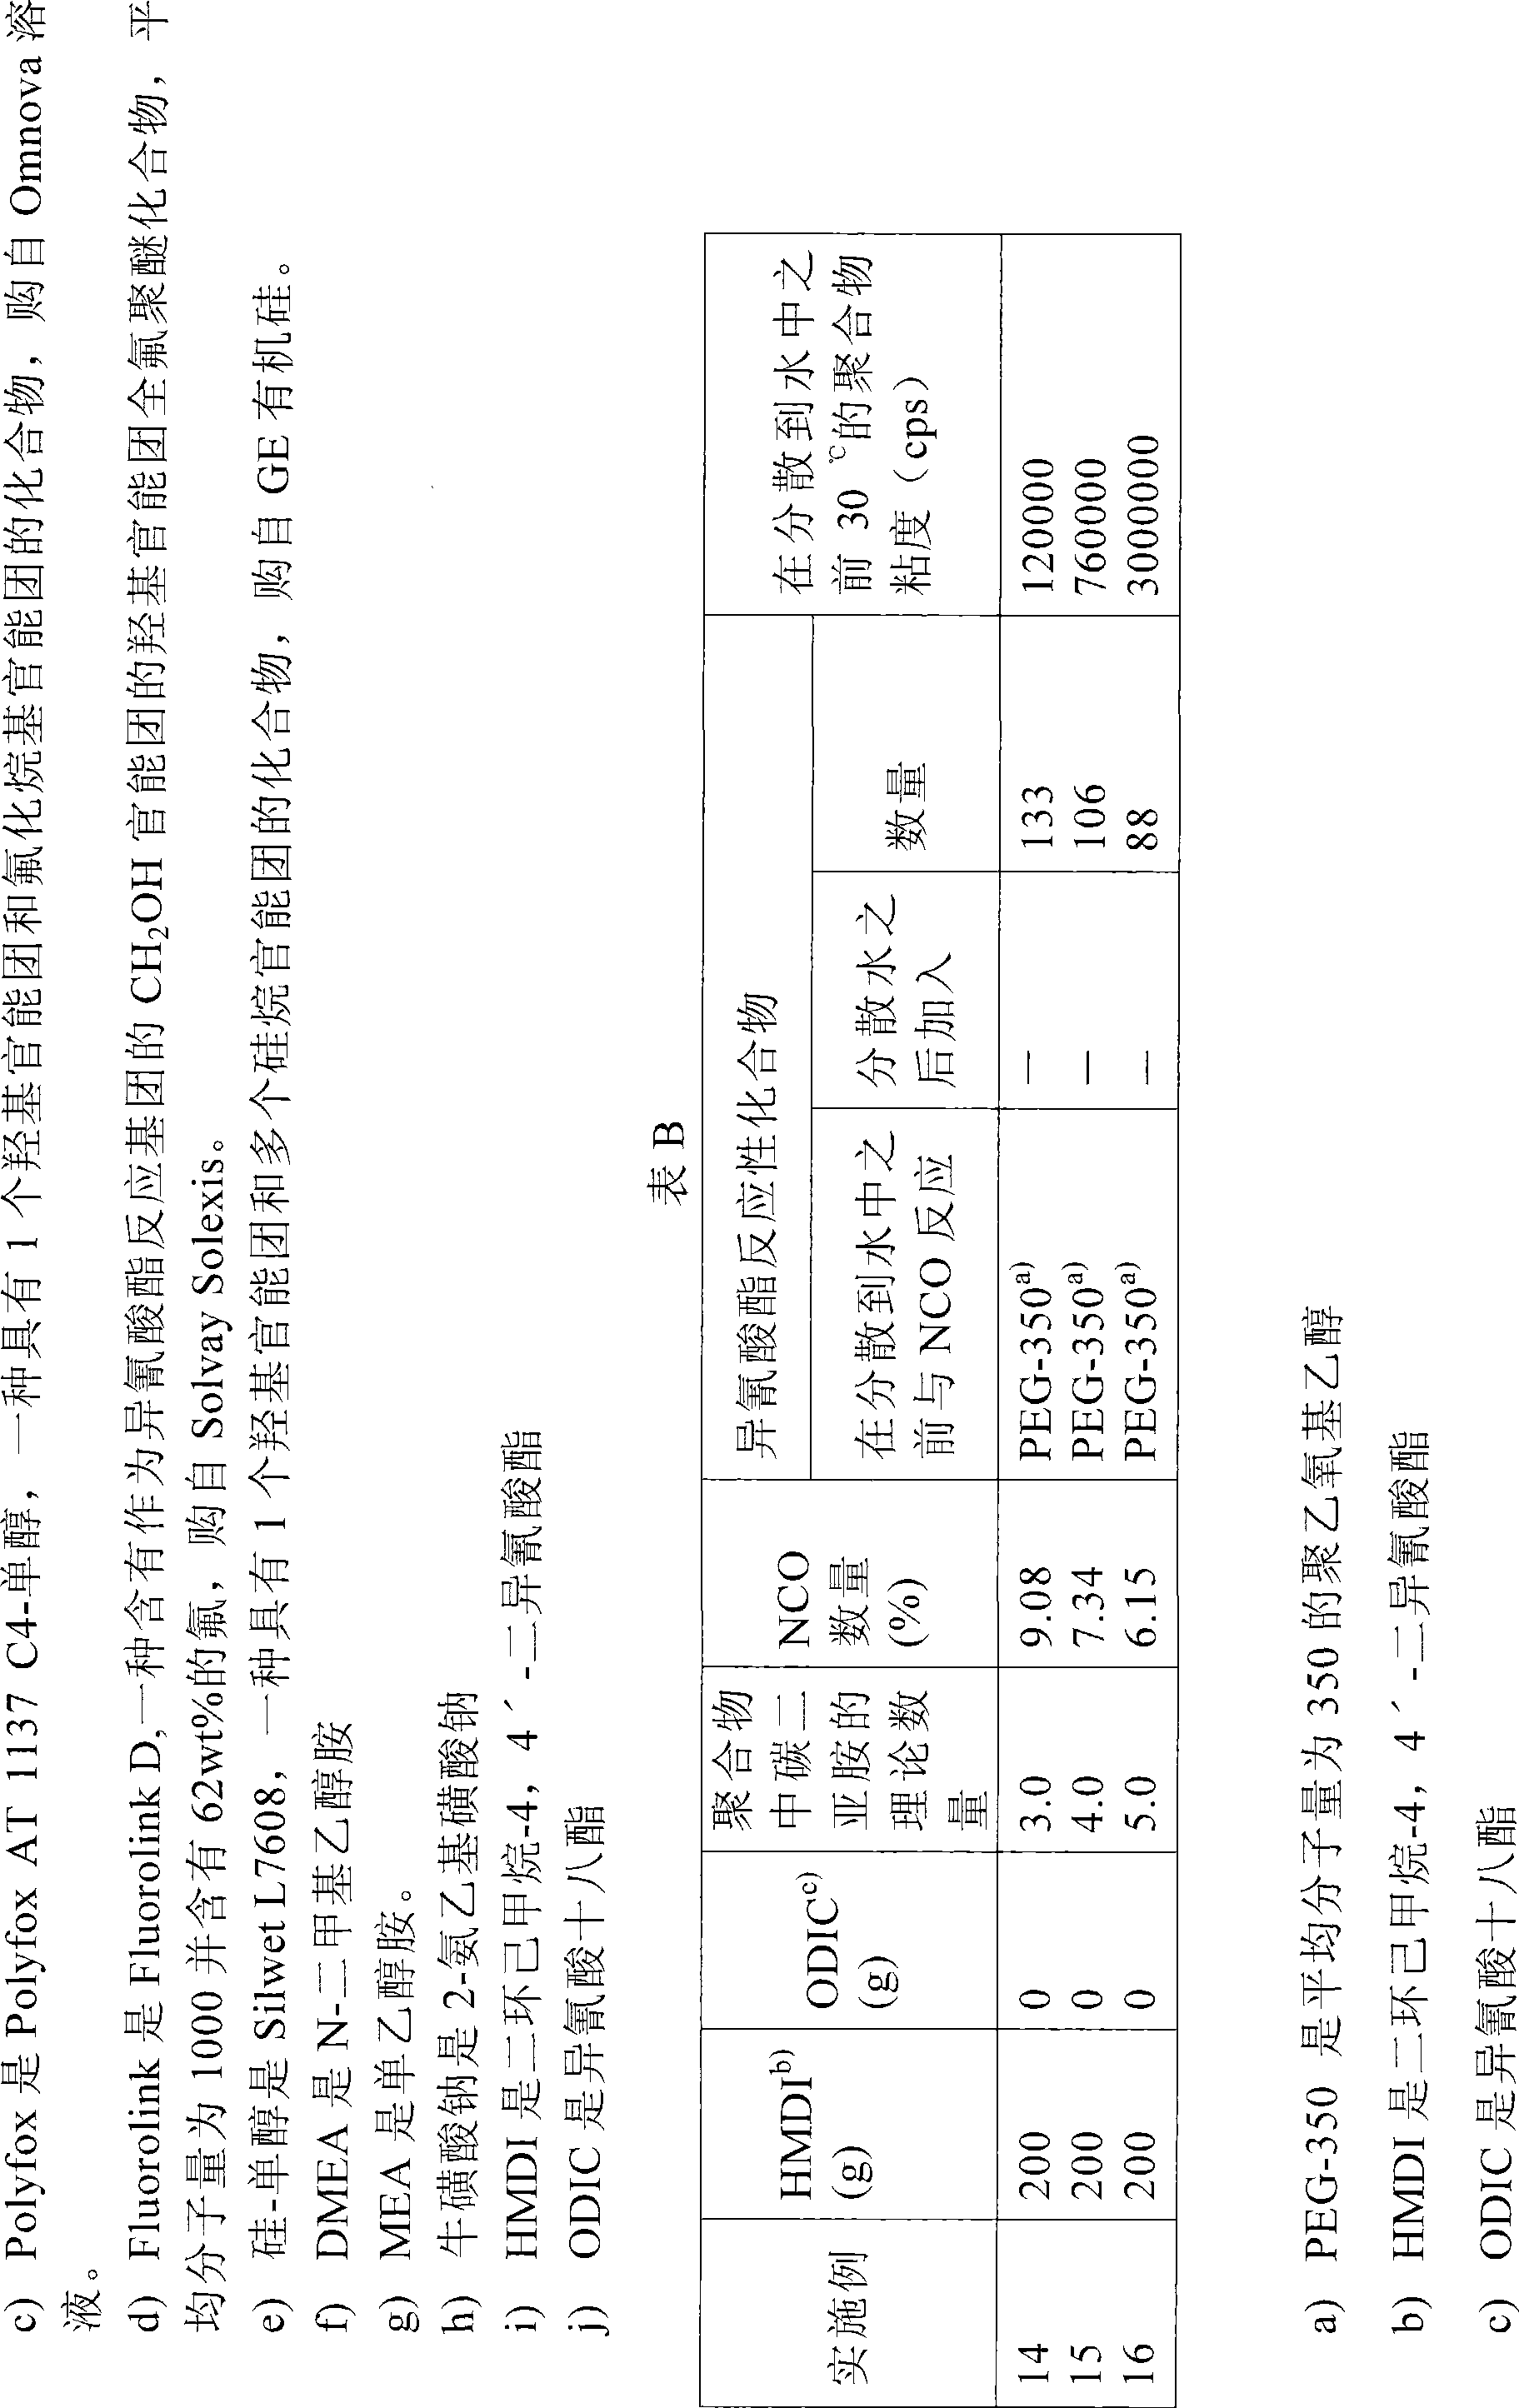 Process for the preparation of dispersions of cross-linking agents in water